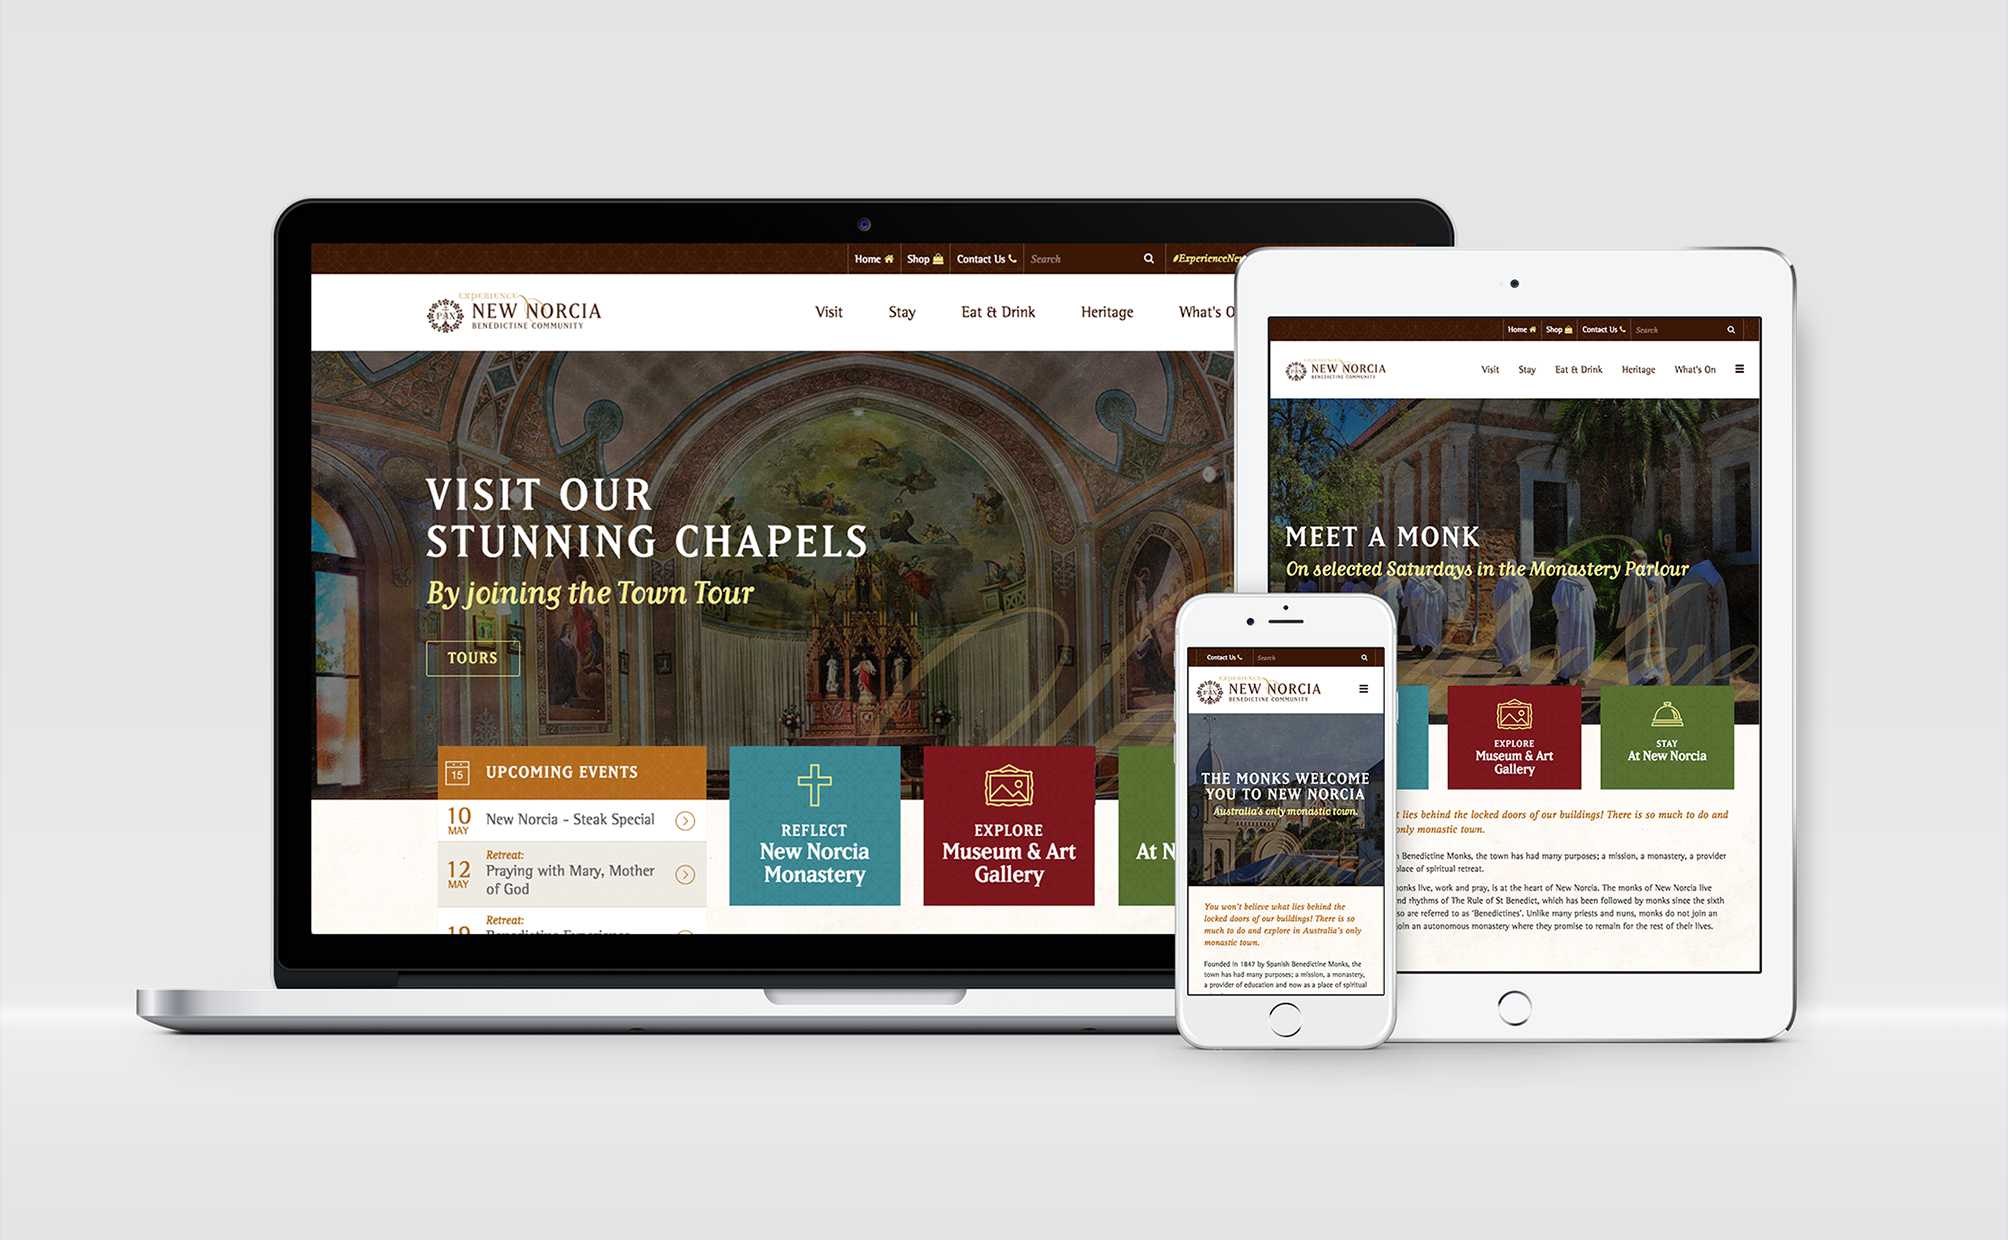 The New Norcia Website is fully responsive to all screen sizes.